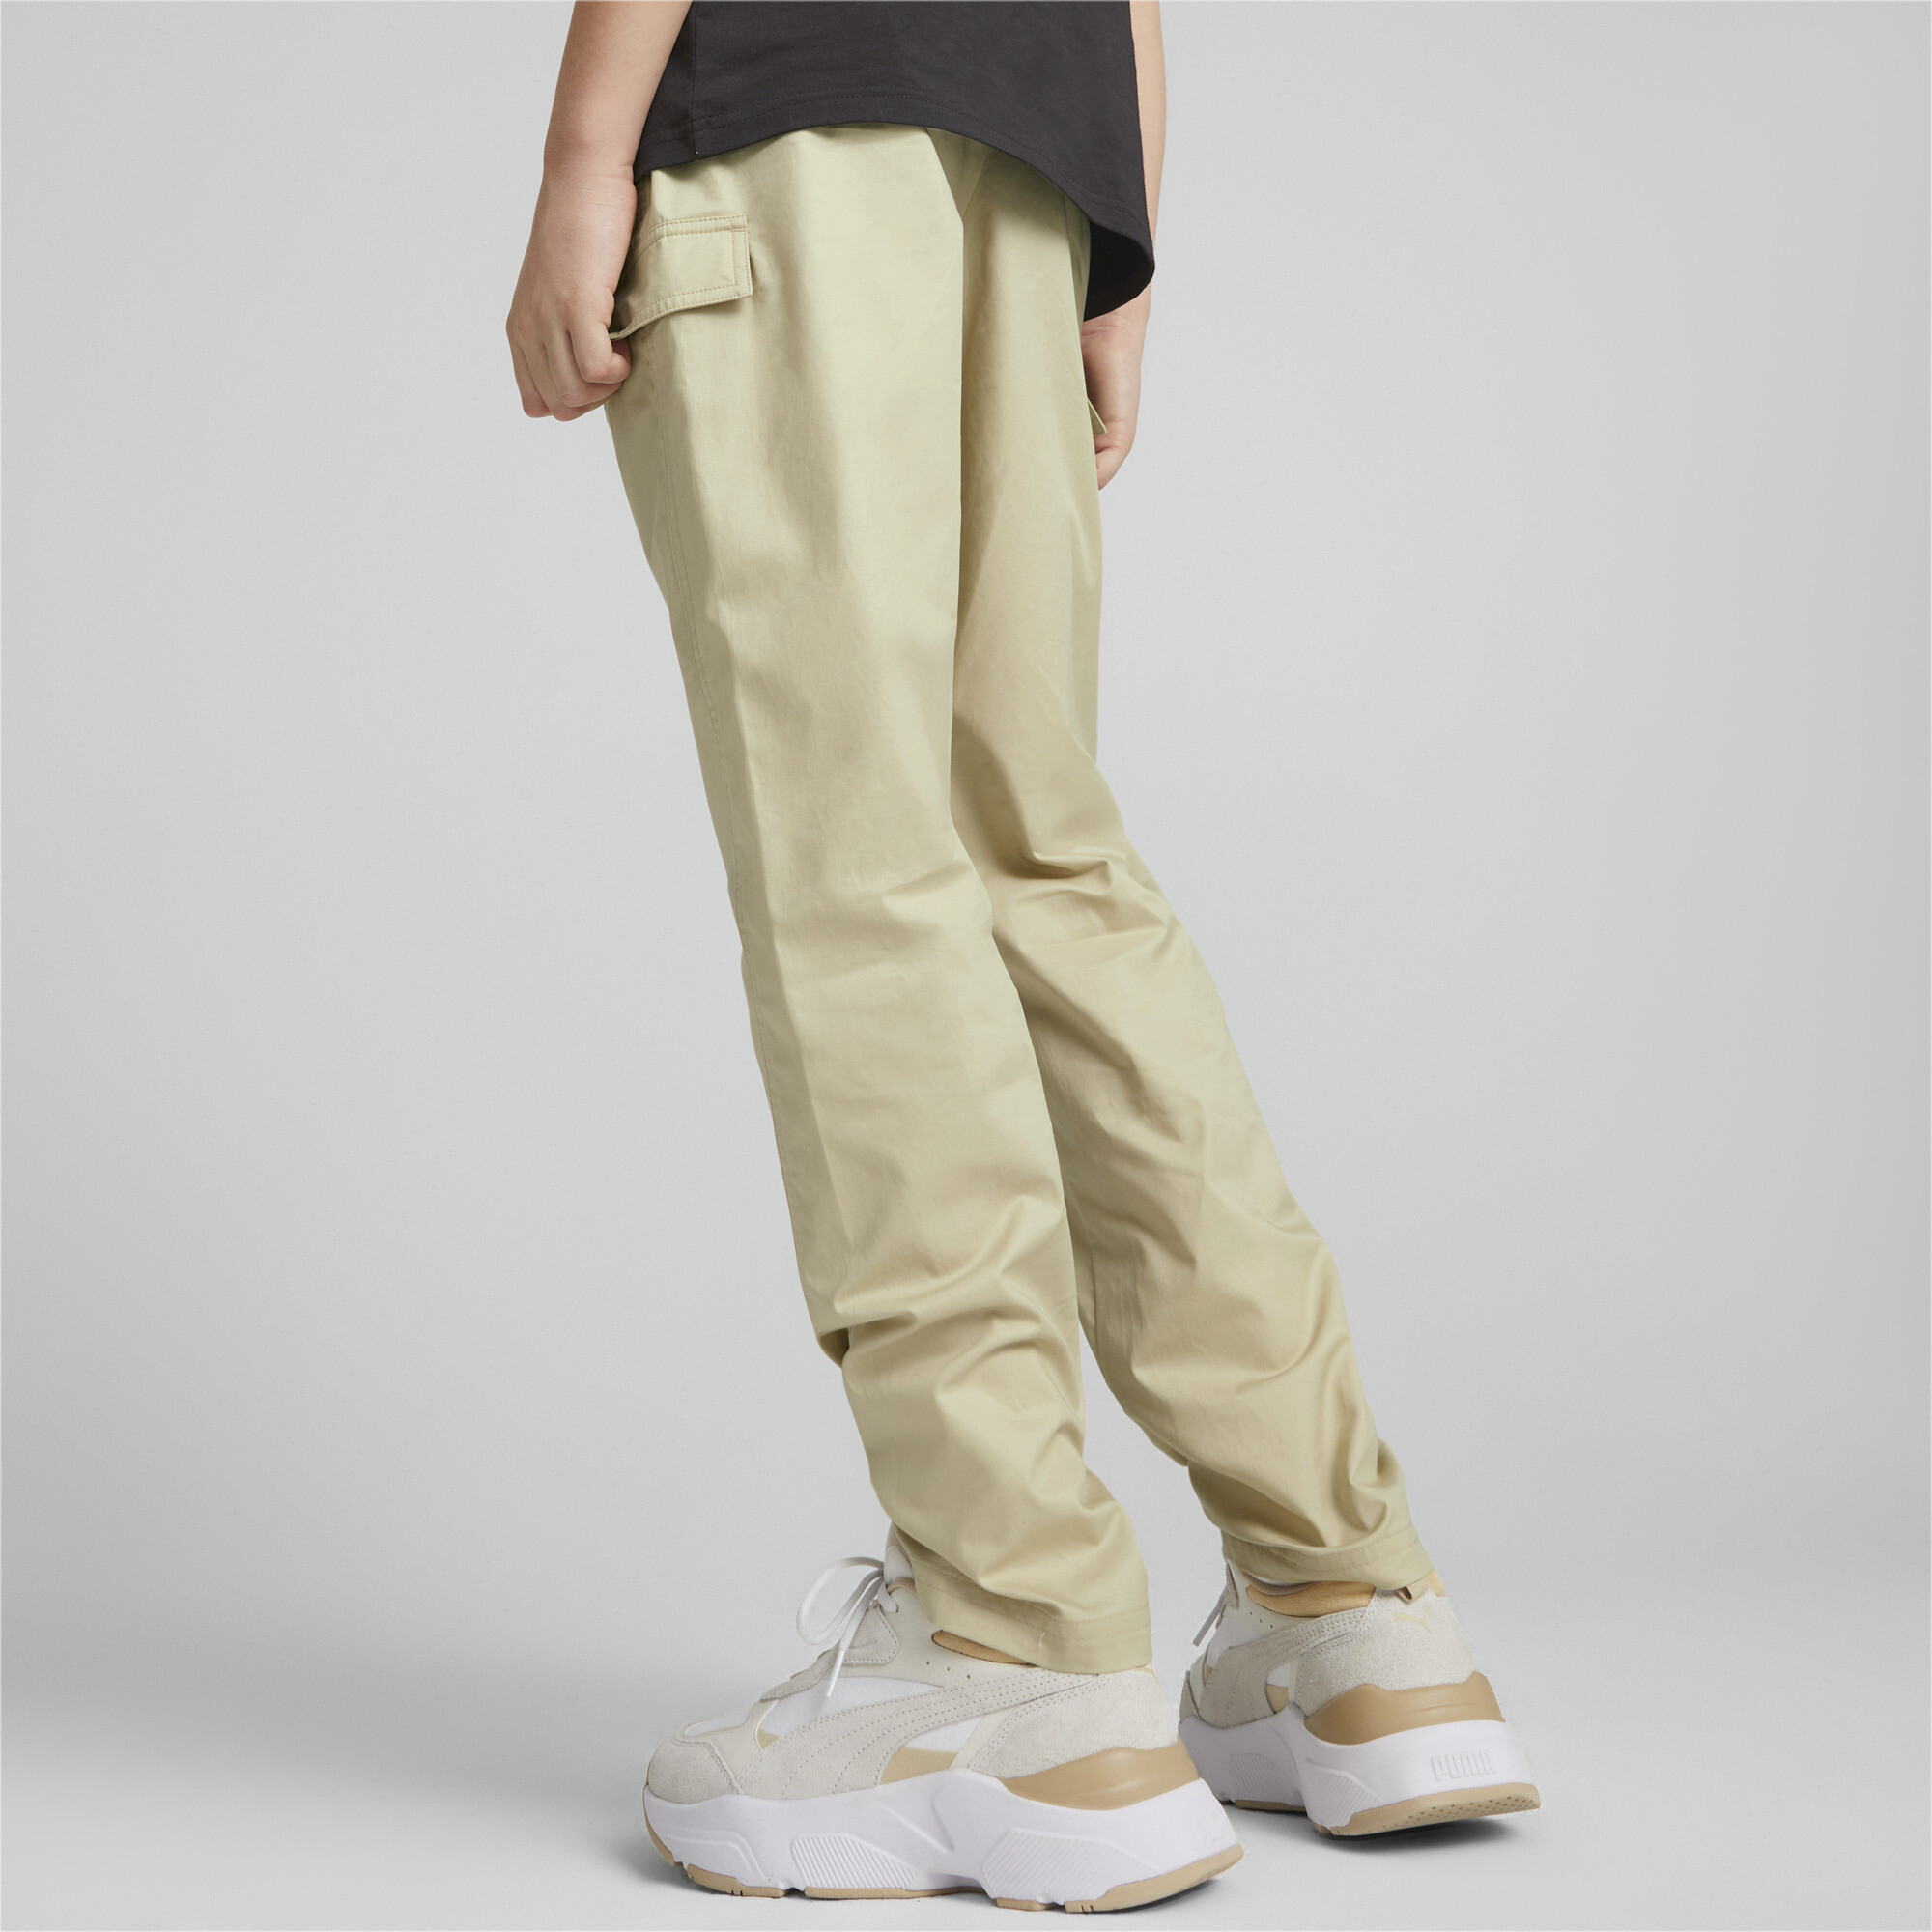 Puma Classics Woven Sweatpants Youth, Beige, Size 7-8Y, Clothing